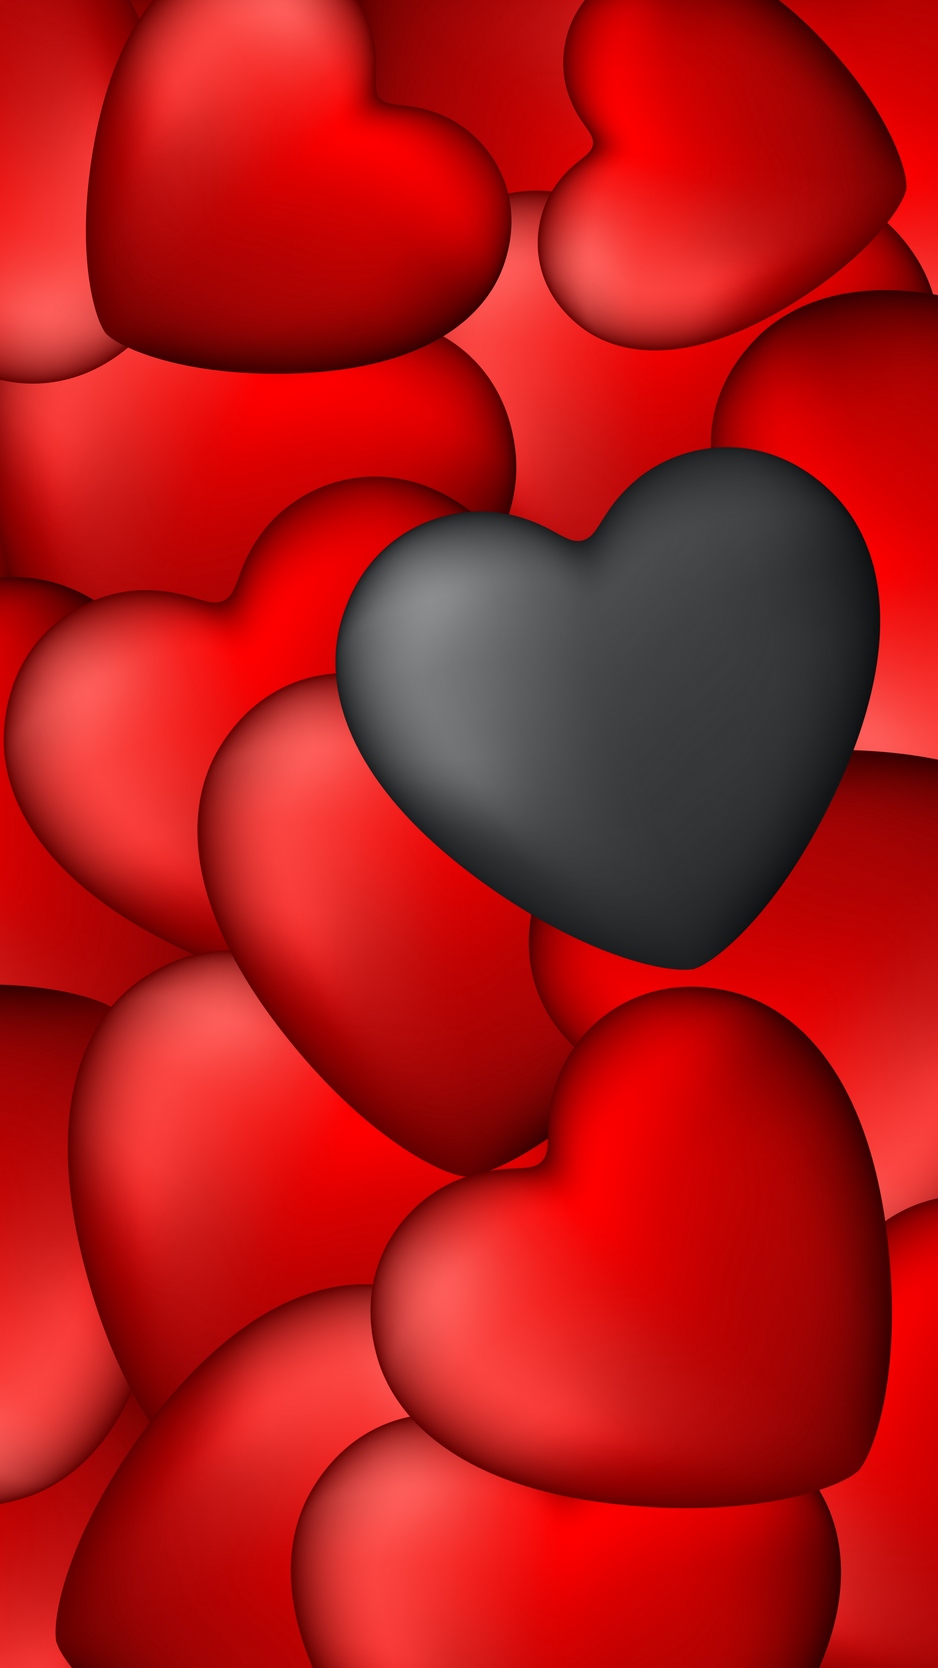 Wallpaper Hearts, Art, Red, Black - Red And Black Heart Wallpaper Hd Iphone , HD Wallpaper & Backgrounds